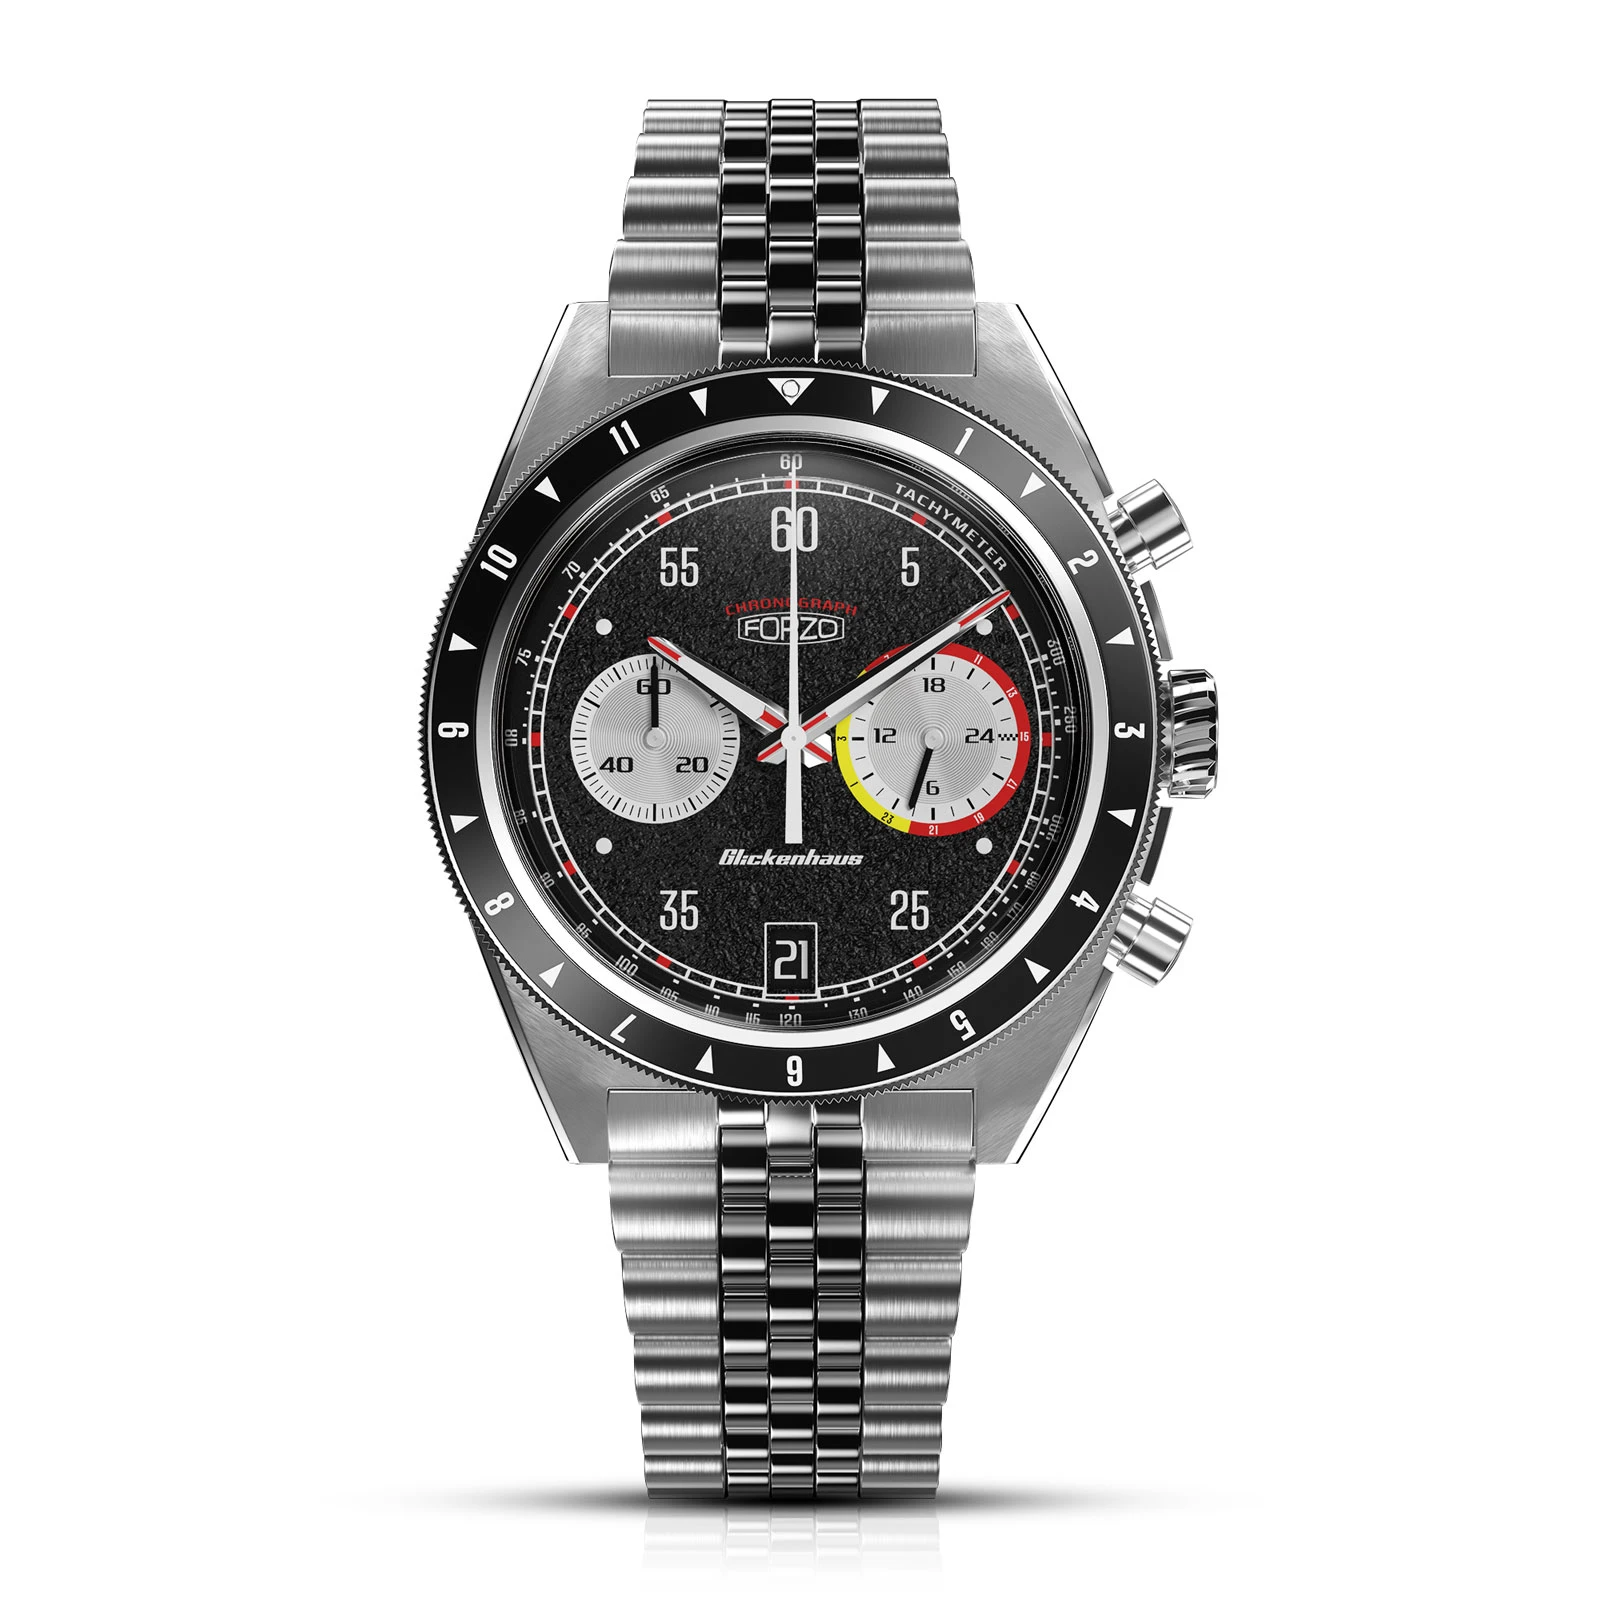 Limited Edition Glickenhaus Road to Le Mans Chronograph Watch Black / Red